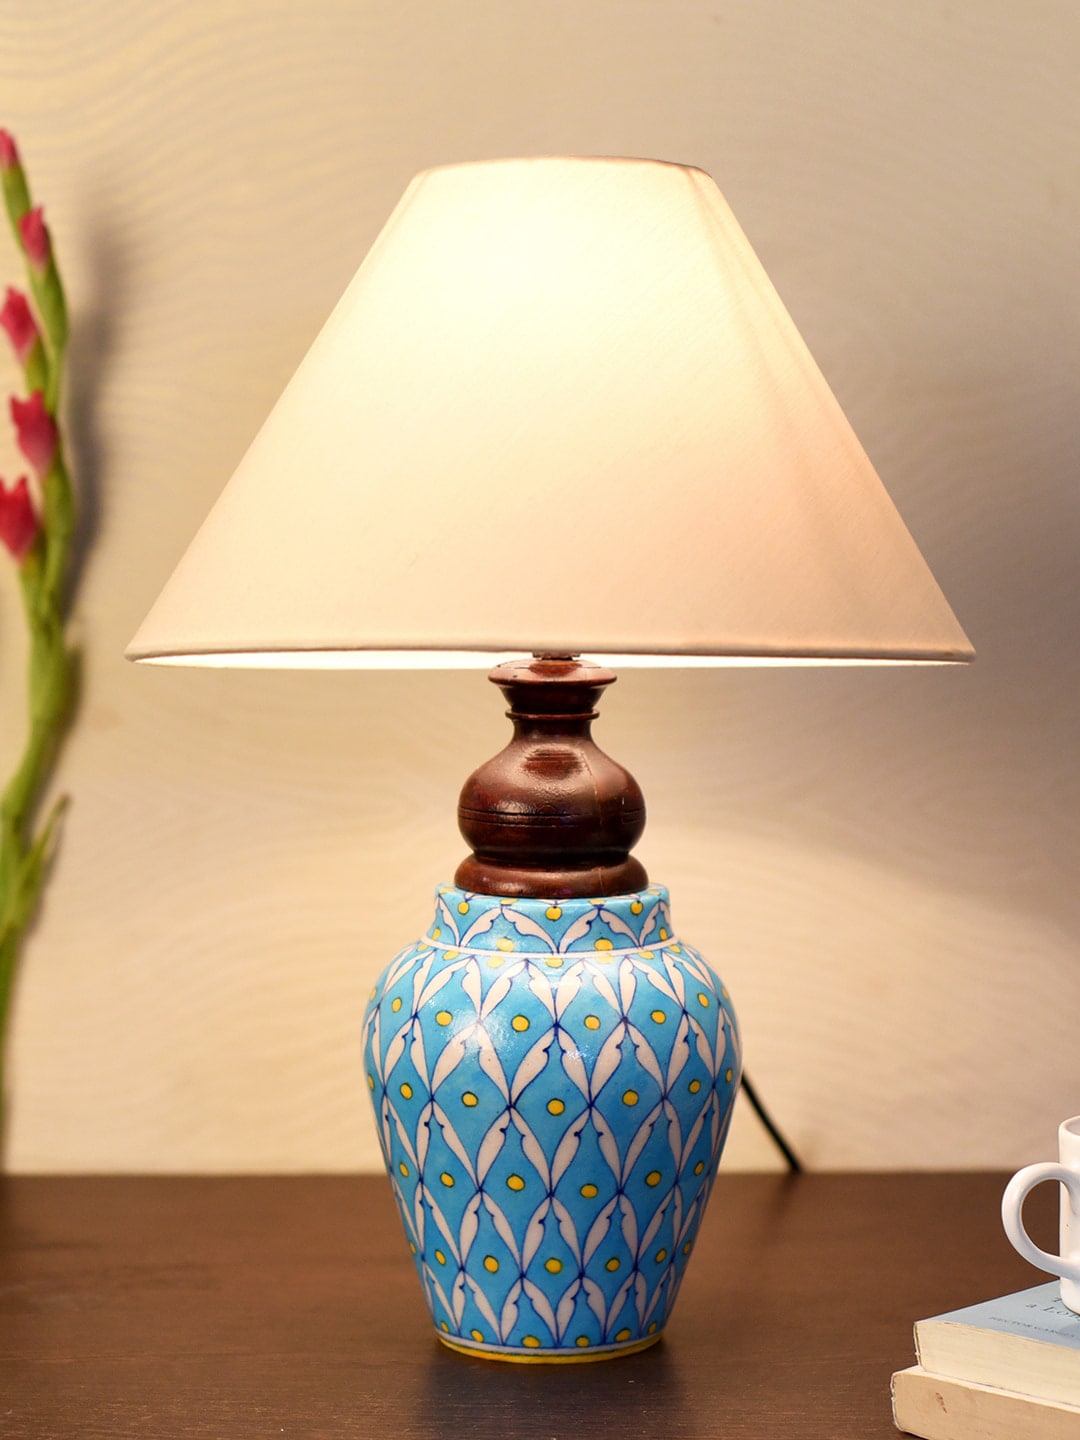 Unravel India Blue Ceramic Lamp with White Shade Price in India